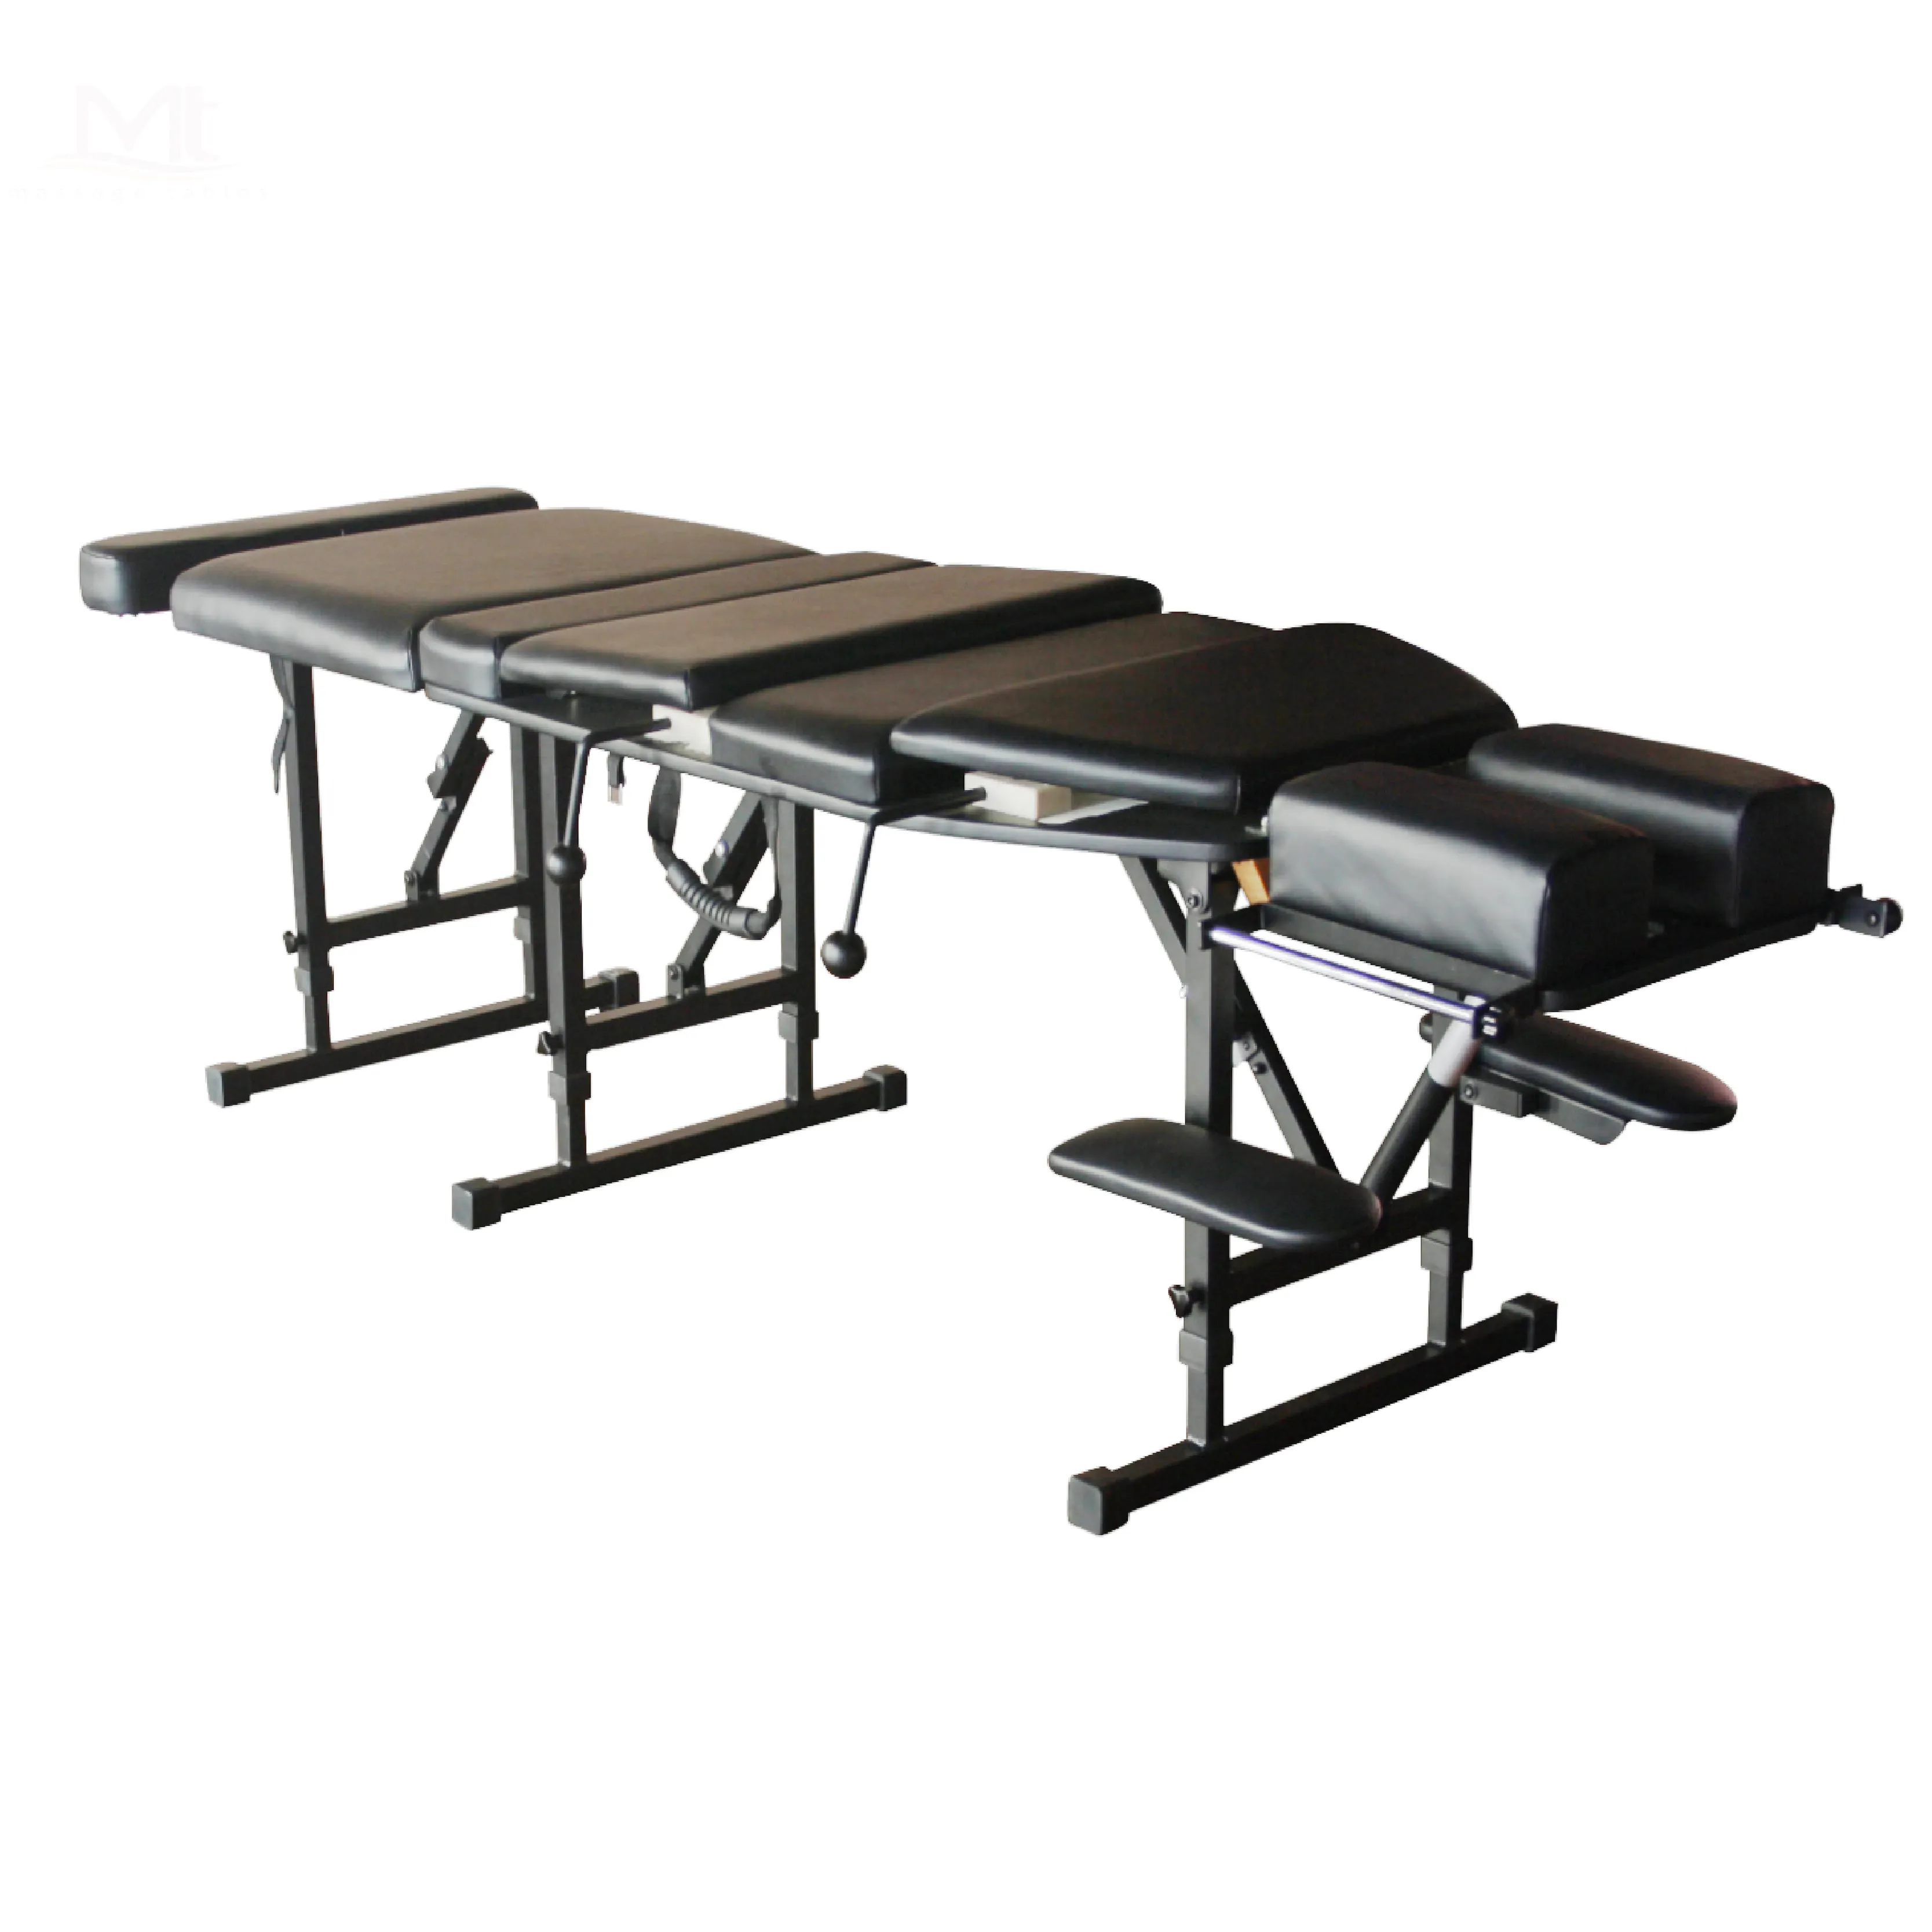 Folding Chiropractic Table MT Arena-180 Folding Chiropractic Bed For Chiropractor Physiotherapy Adjustable Chiropractic Table Chiropractic Drop Table